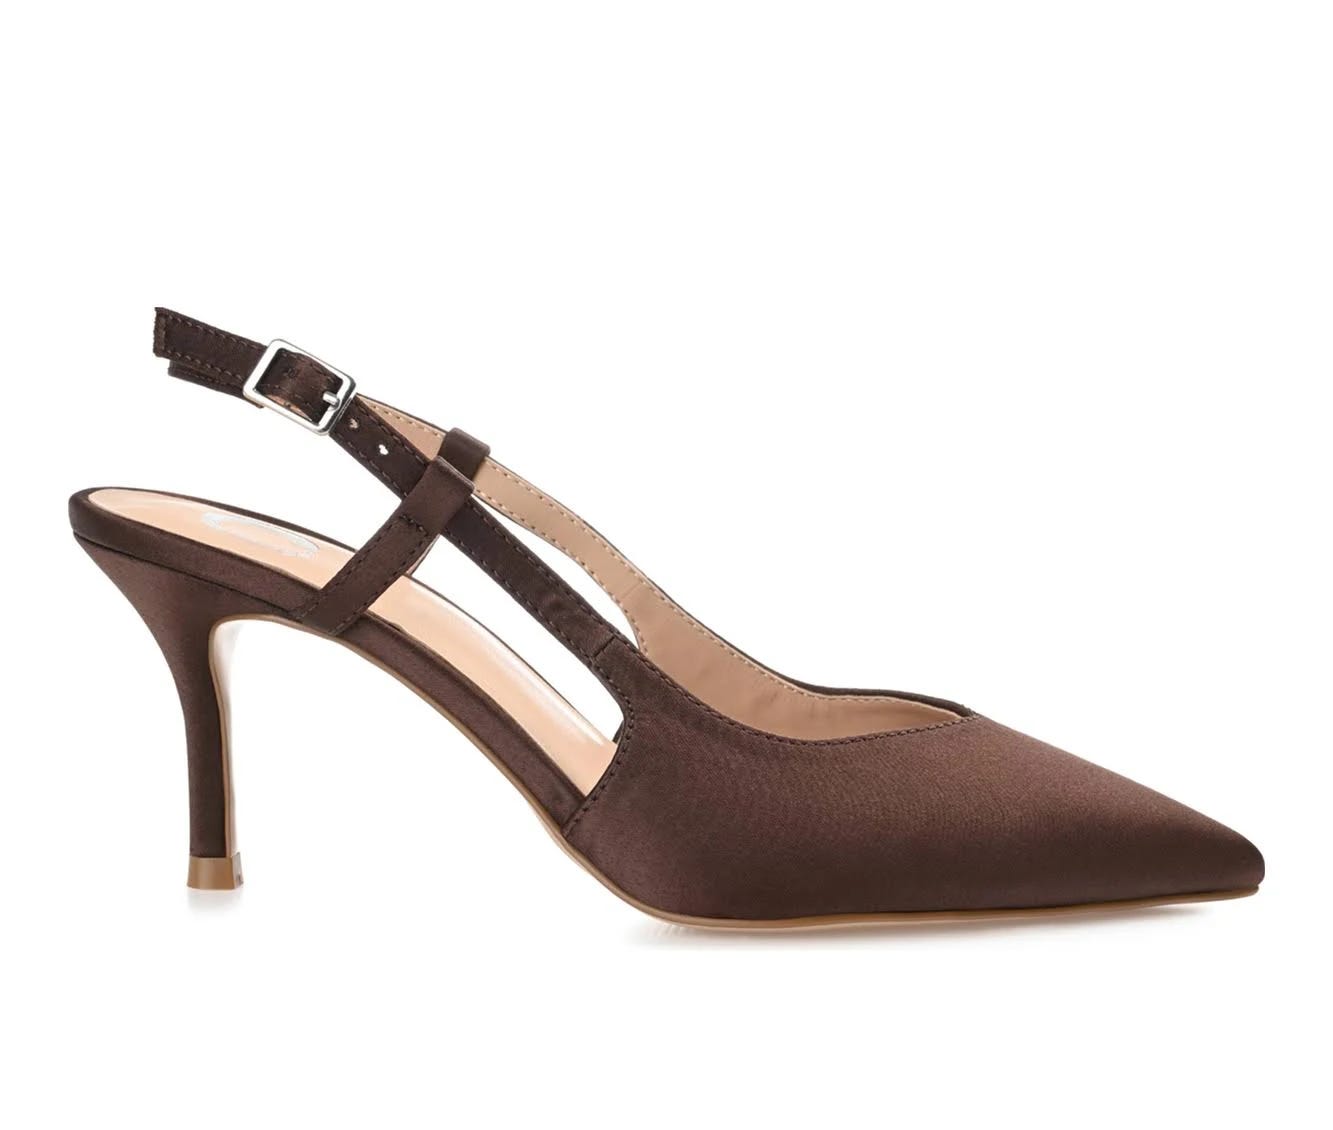 Knightly Pump: Elegant Brown Heel with Satin Fabric and Padded Footbed | Image